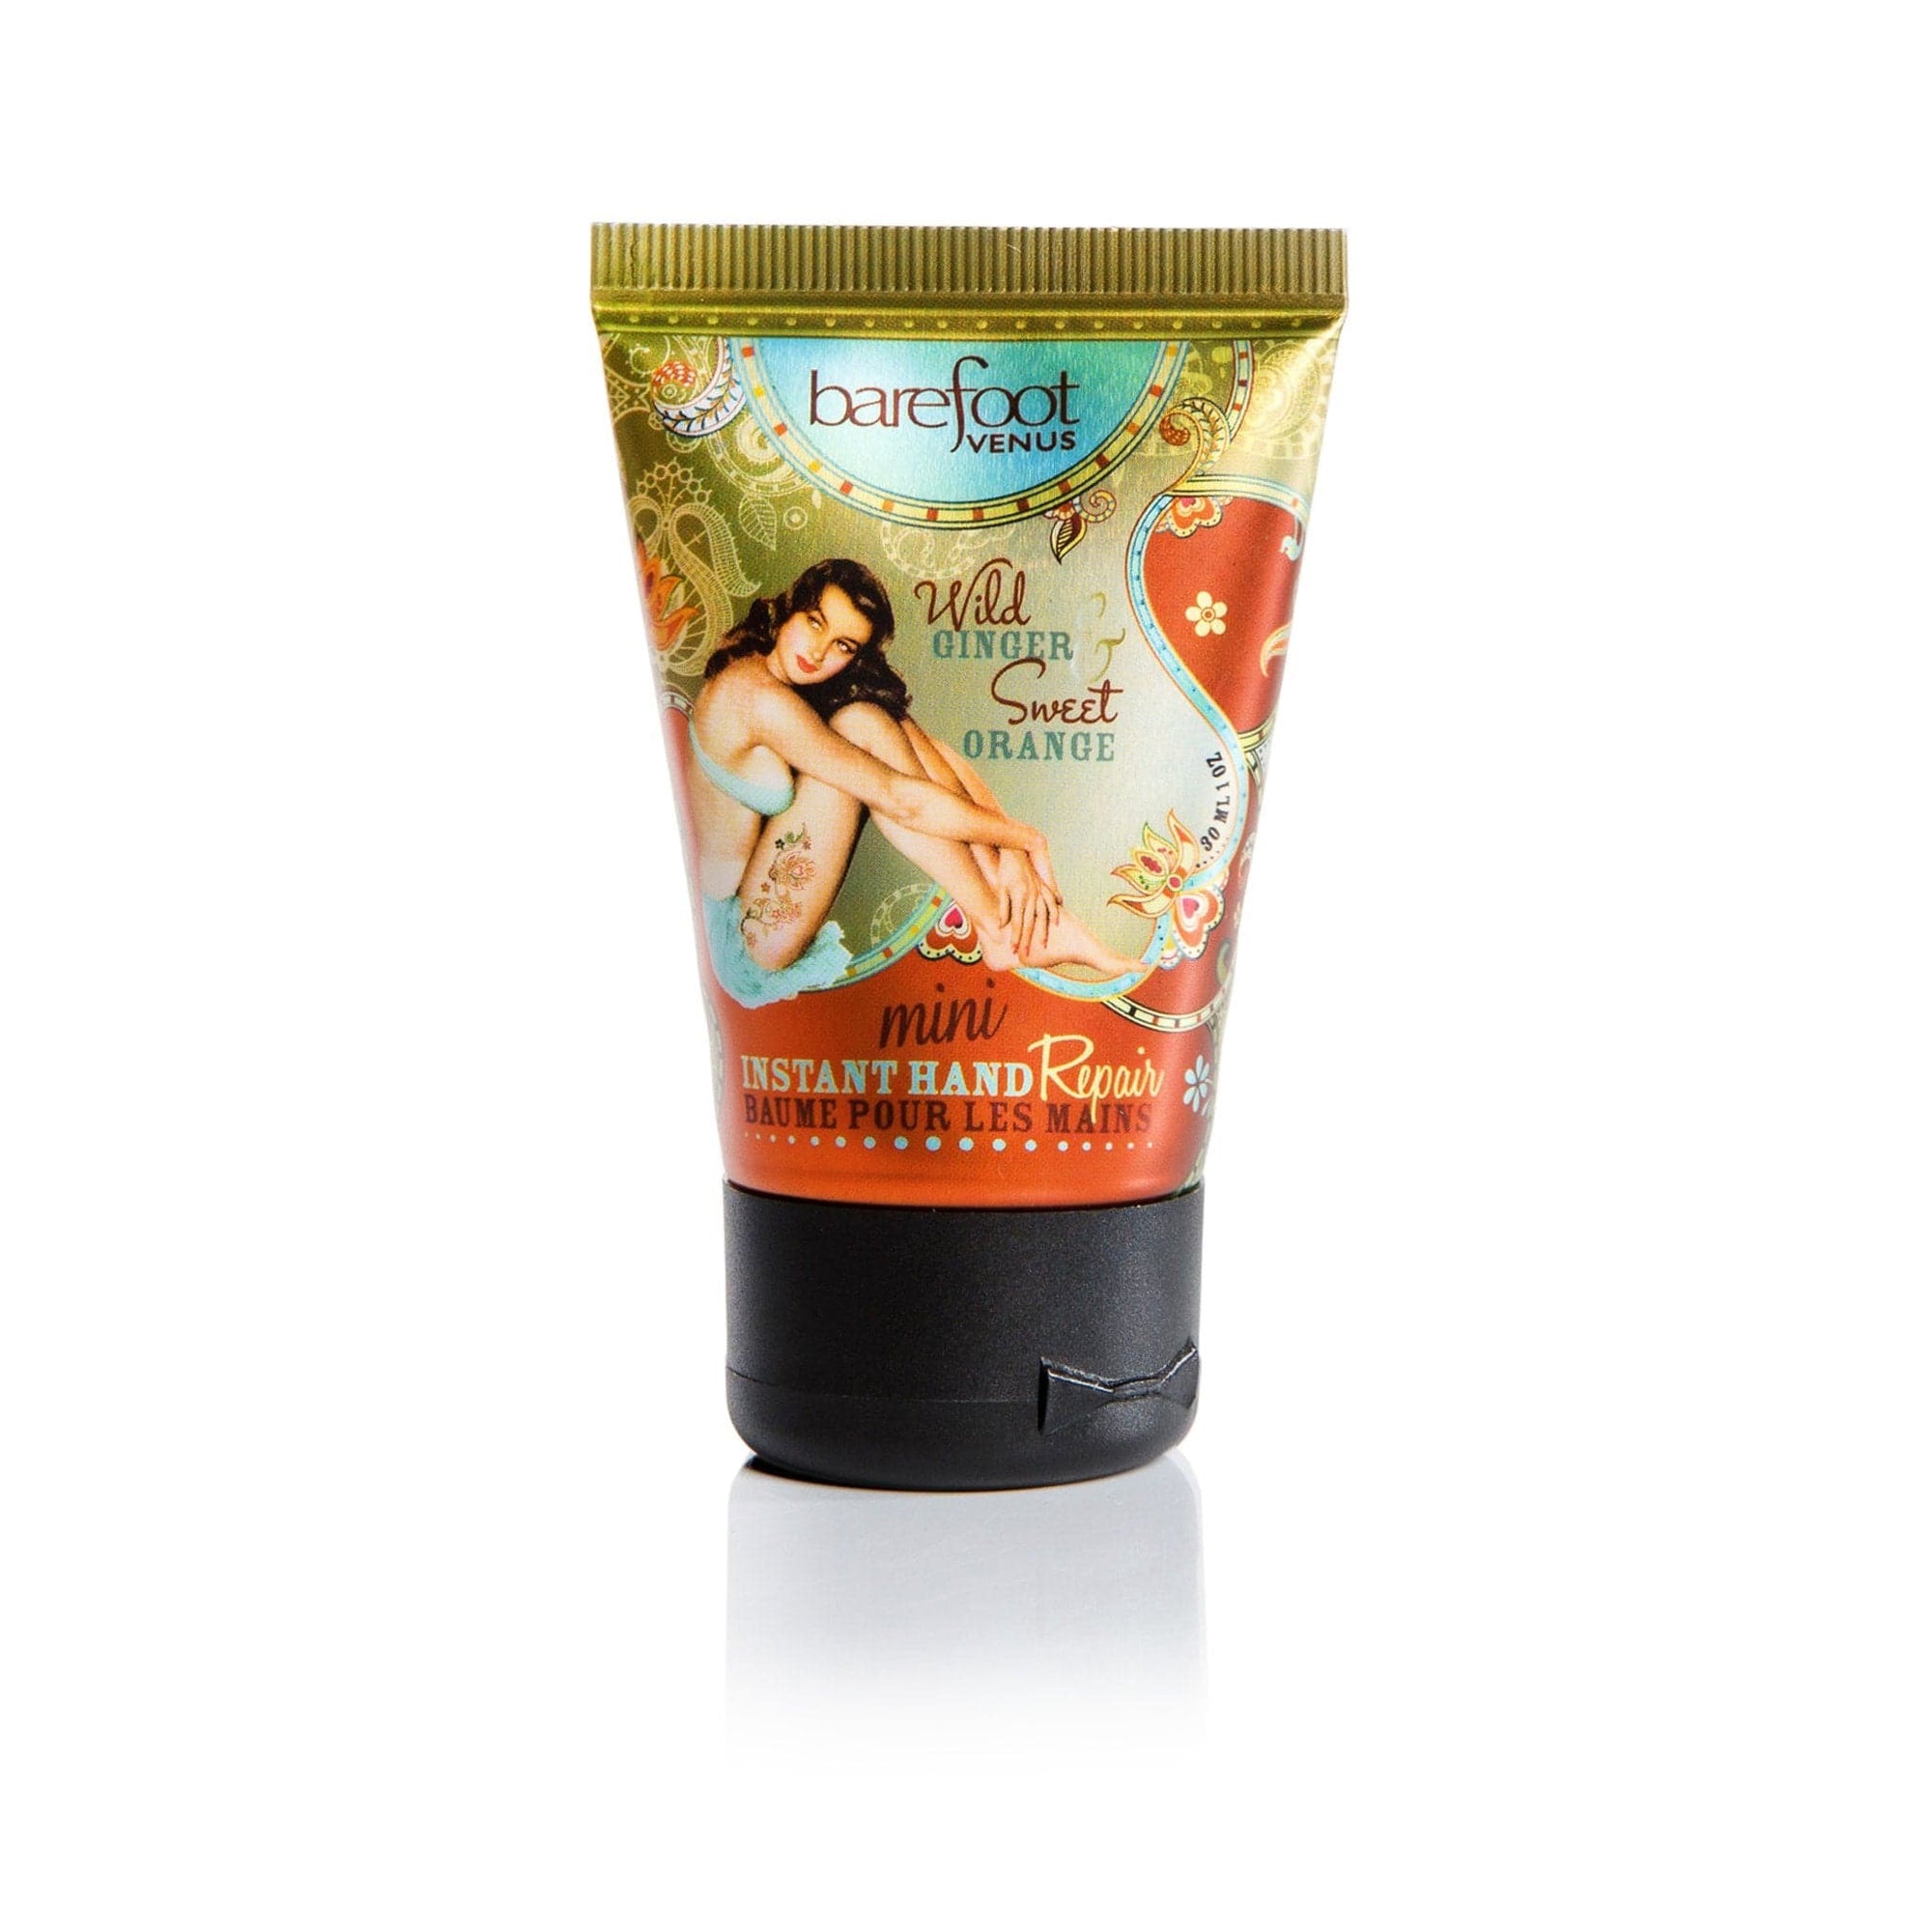 Wild Ginger & Sweet Orange Instant Hand Repair ON-THE-GO. INTENSELY HYDRATING. Barefoot Venus